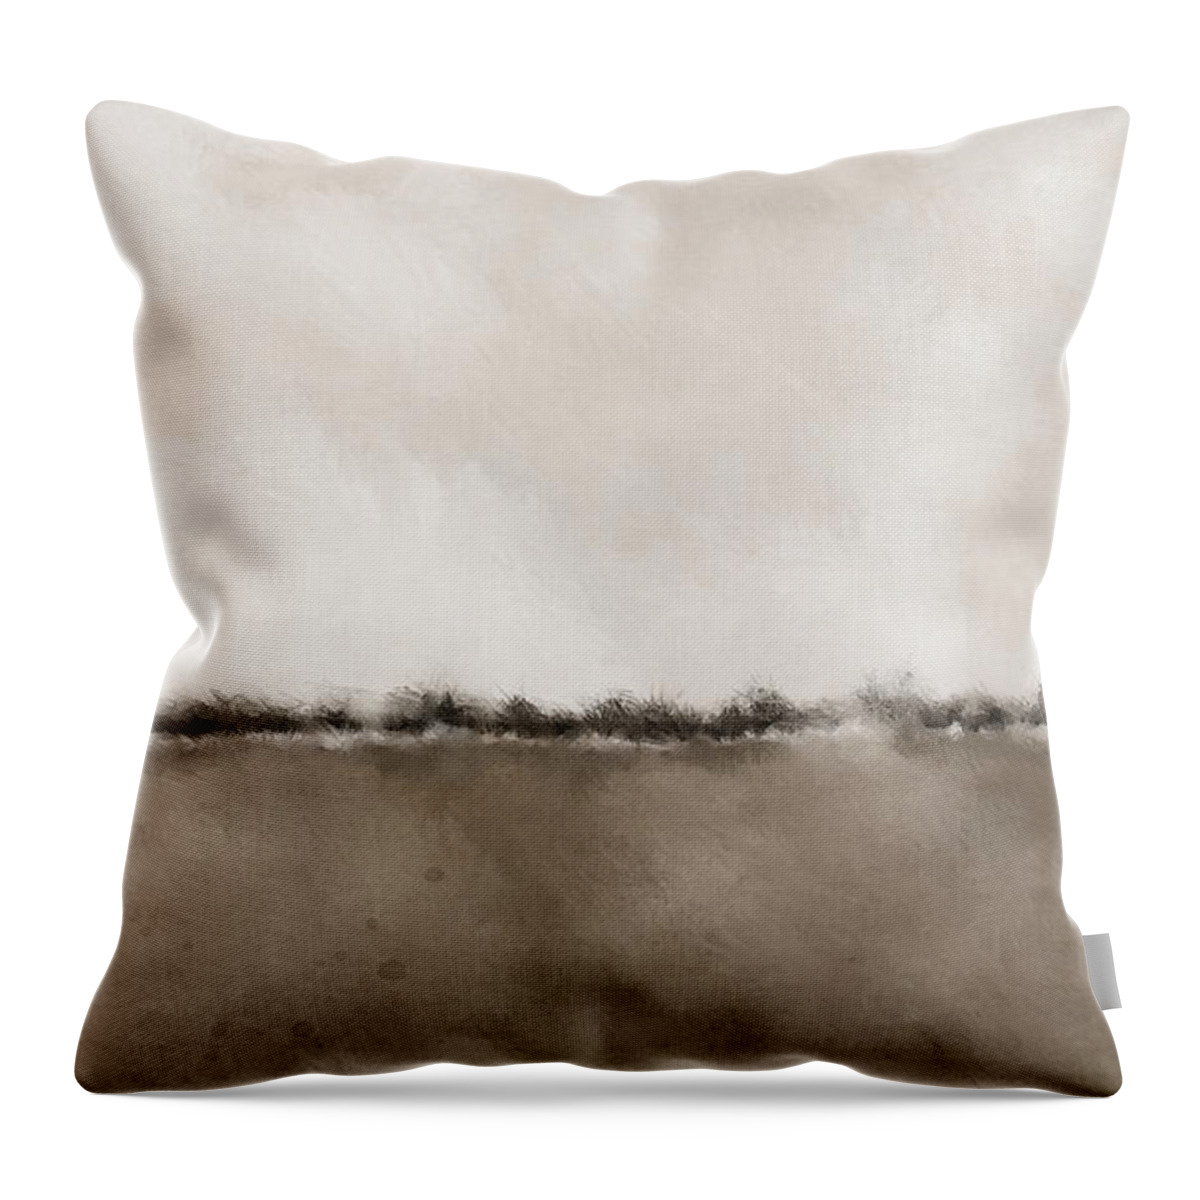 Abstract Landscape Throw Pillow featuring the digital art Further Away Than You Think by Shawn Conn